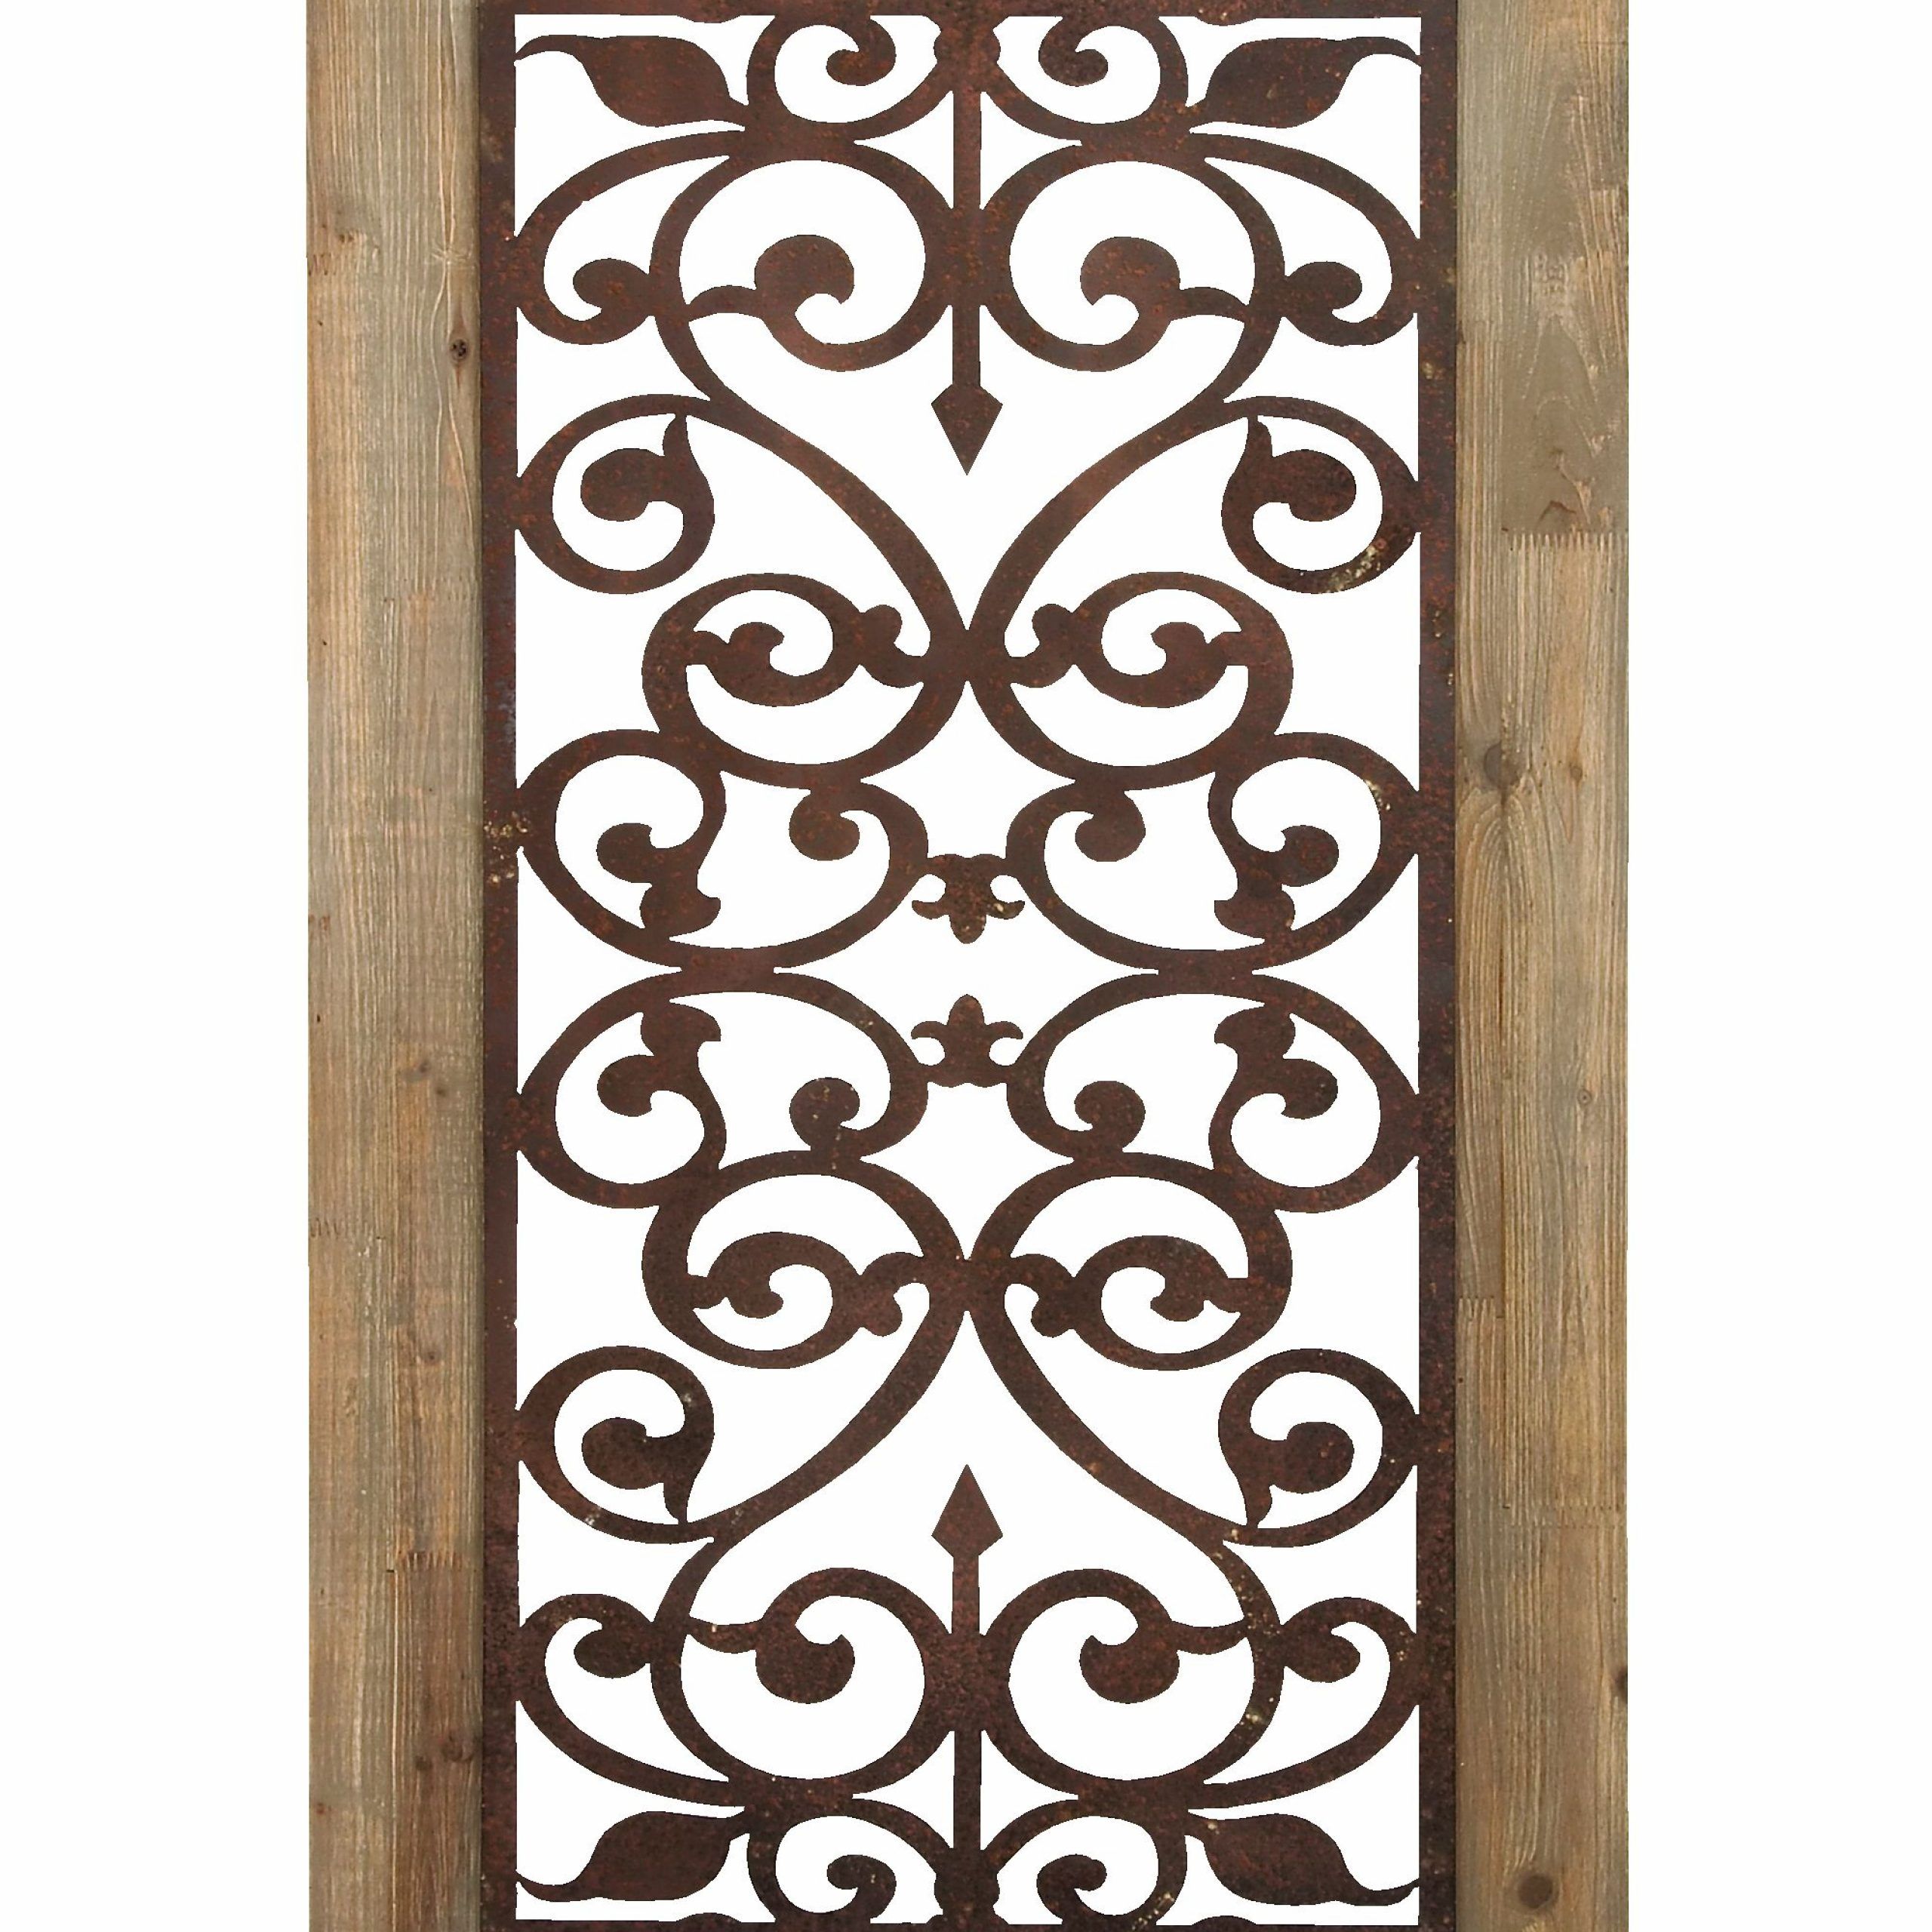 Decmode 26" X 46" Distressed Wood & Brown Metal Wall Art Panel W With Wooden Blocks Metal Wall Art (View 4 of 15)